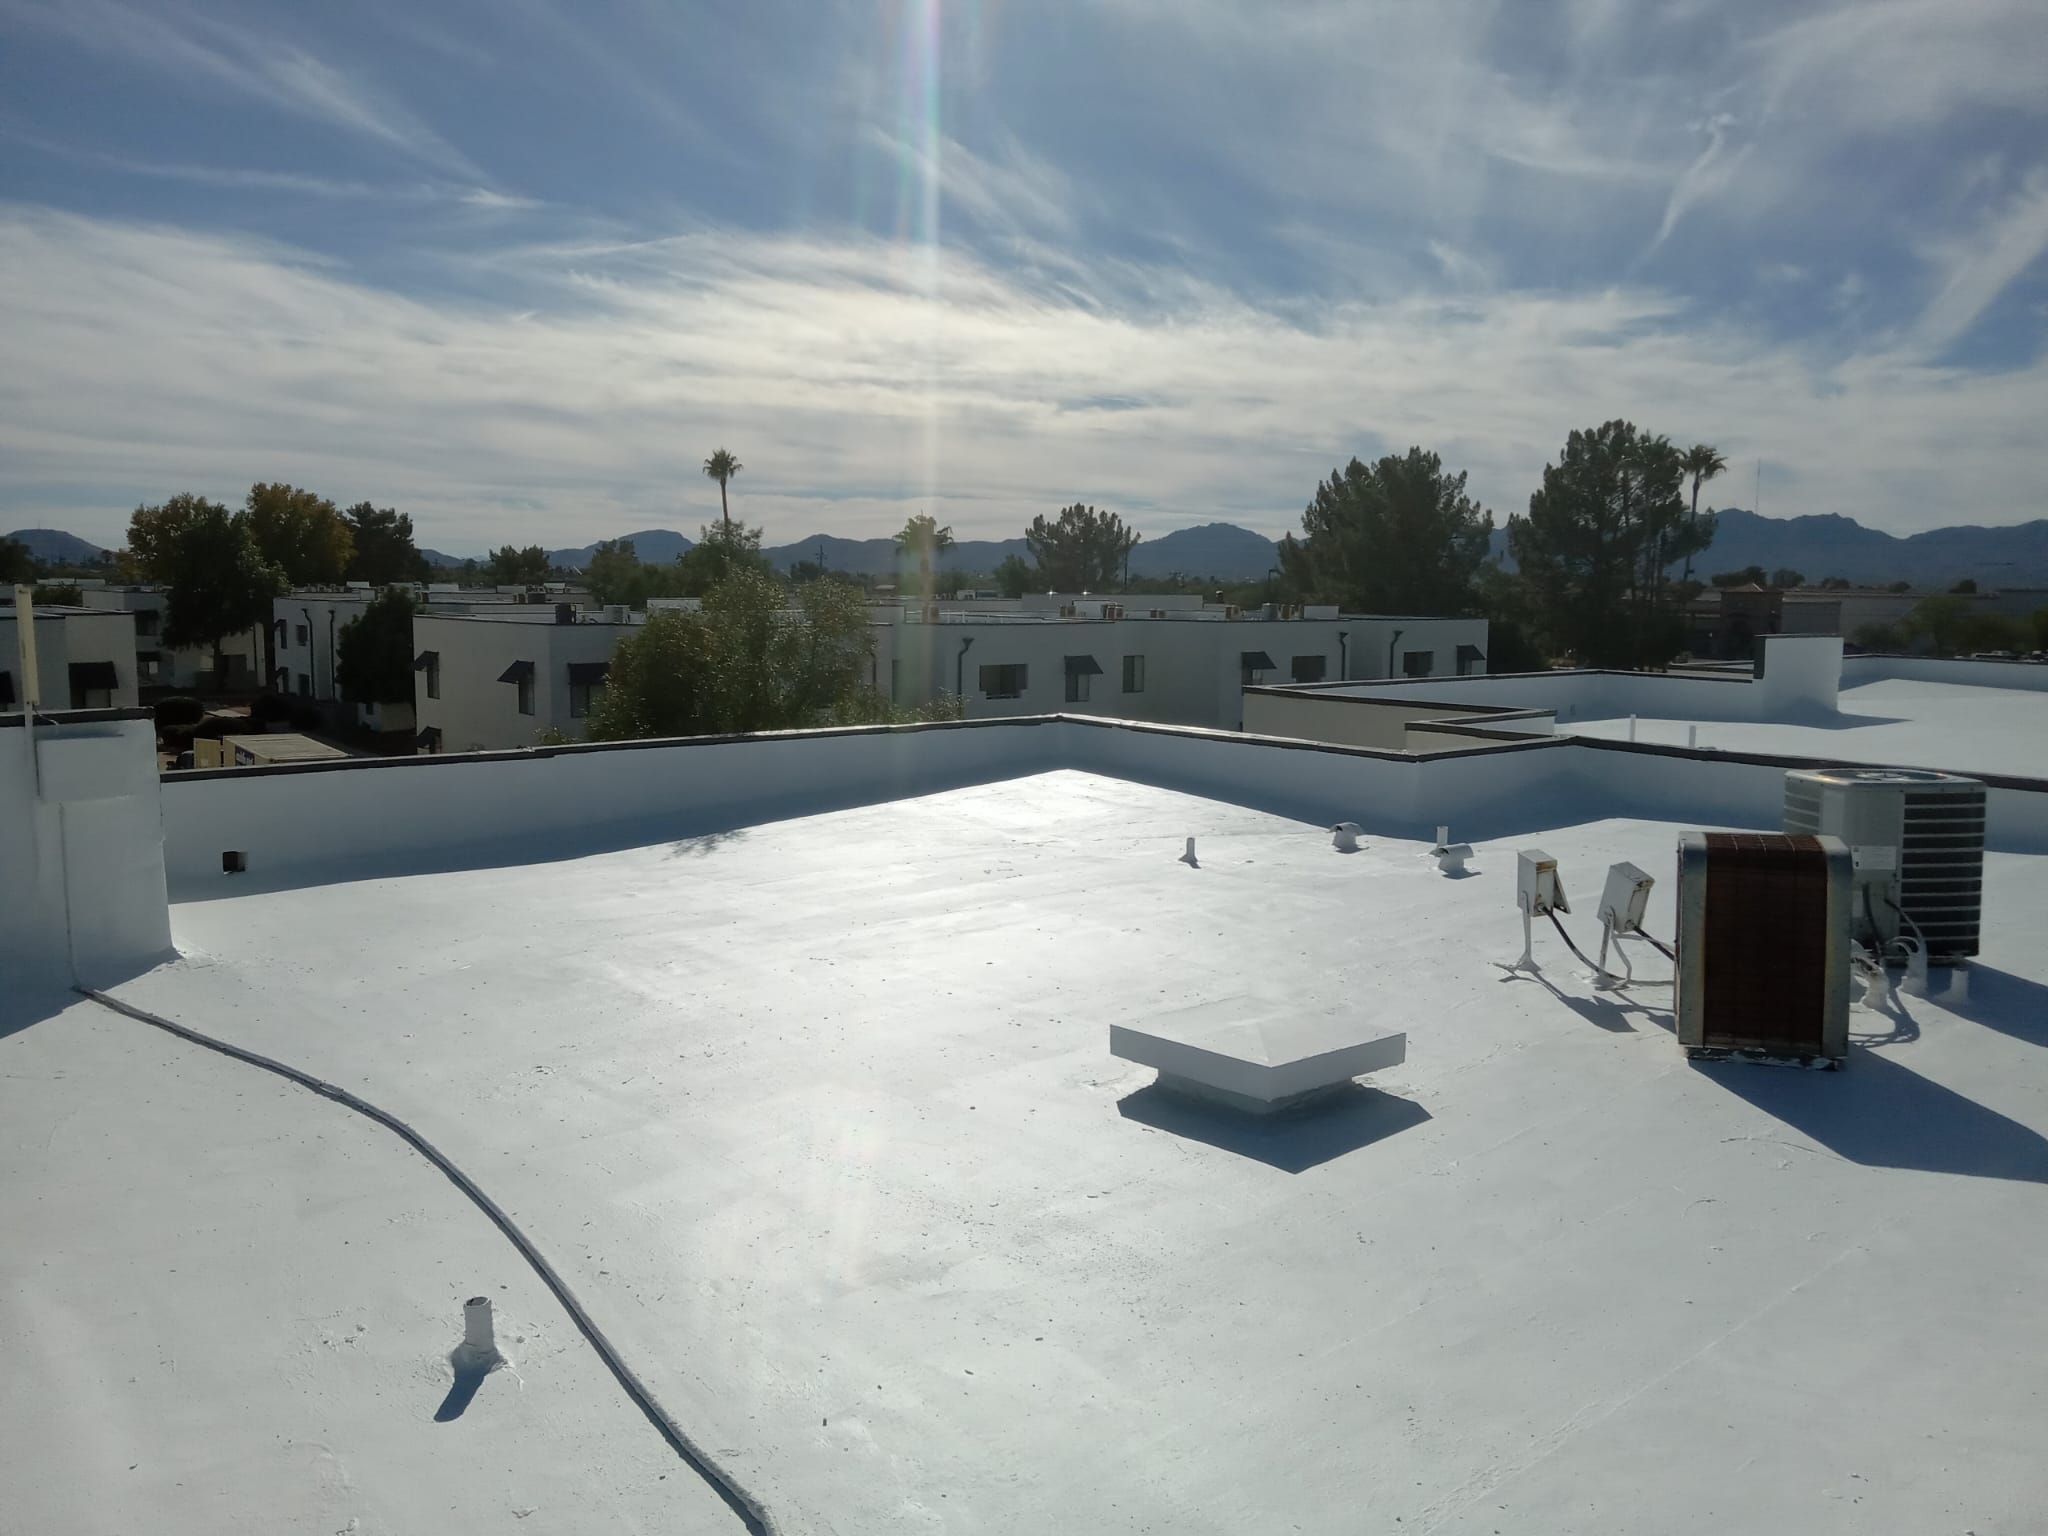 Shiny reflective foam roof in Estancia, showing its energy-efficient features.